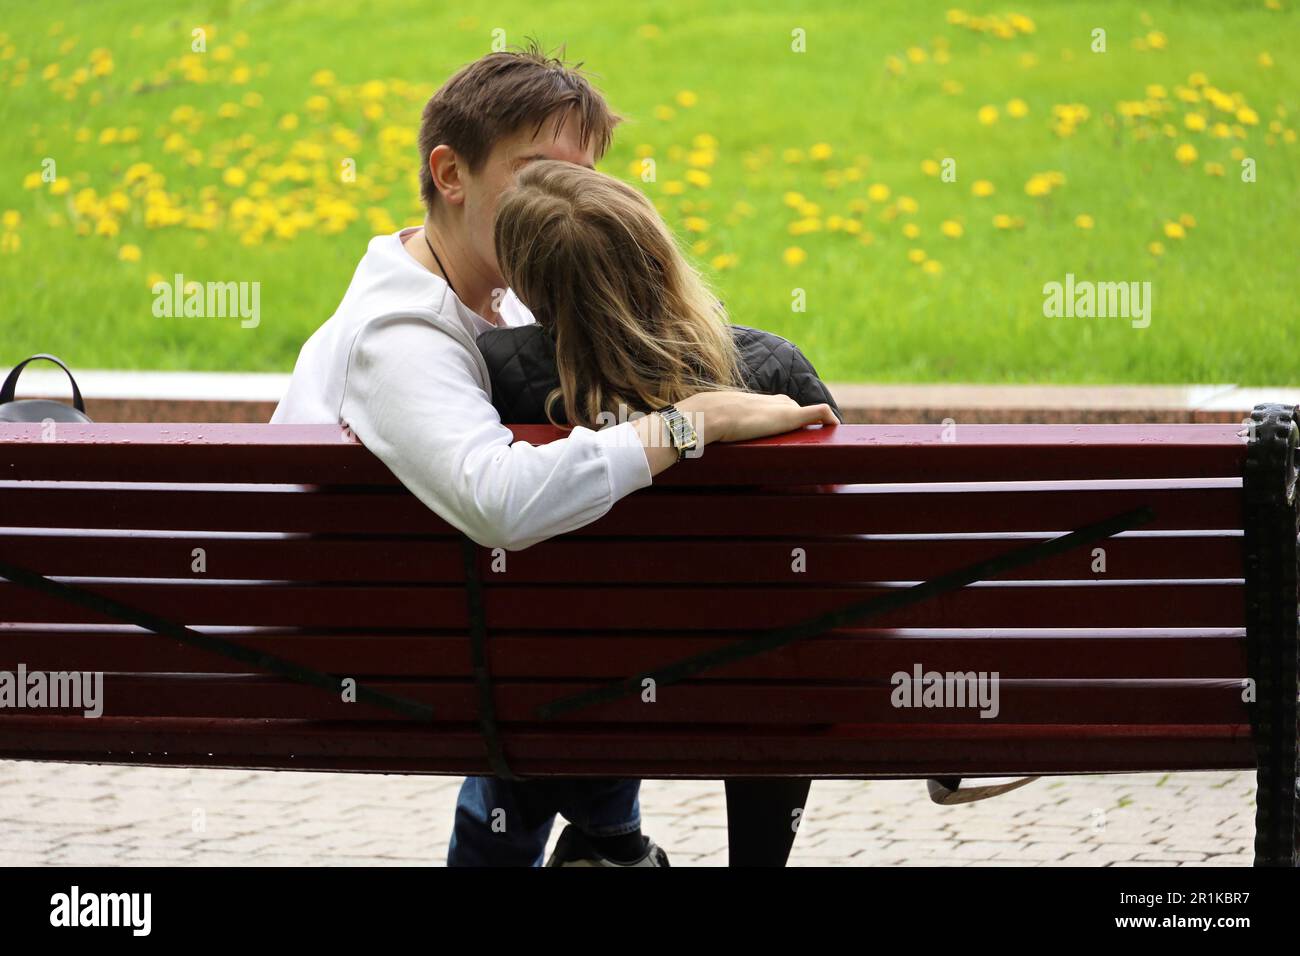 Young couple kissing on a city street. Girl and guy embracing sitting on a bench in spring park Stock Photo